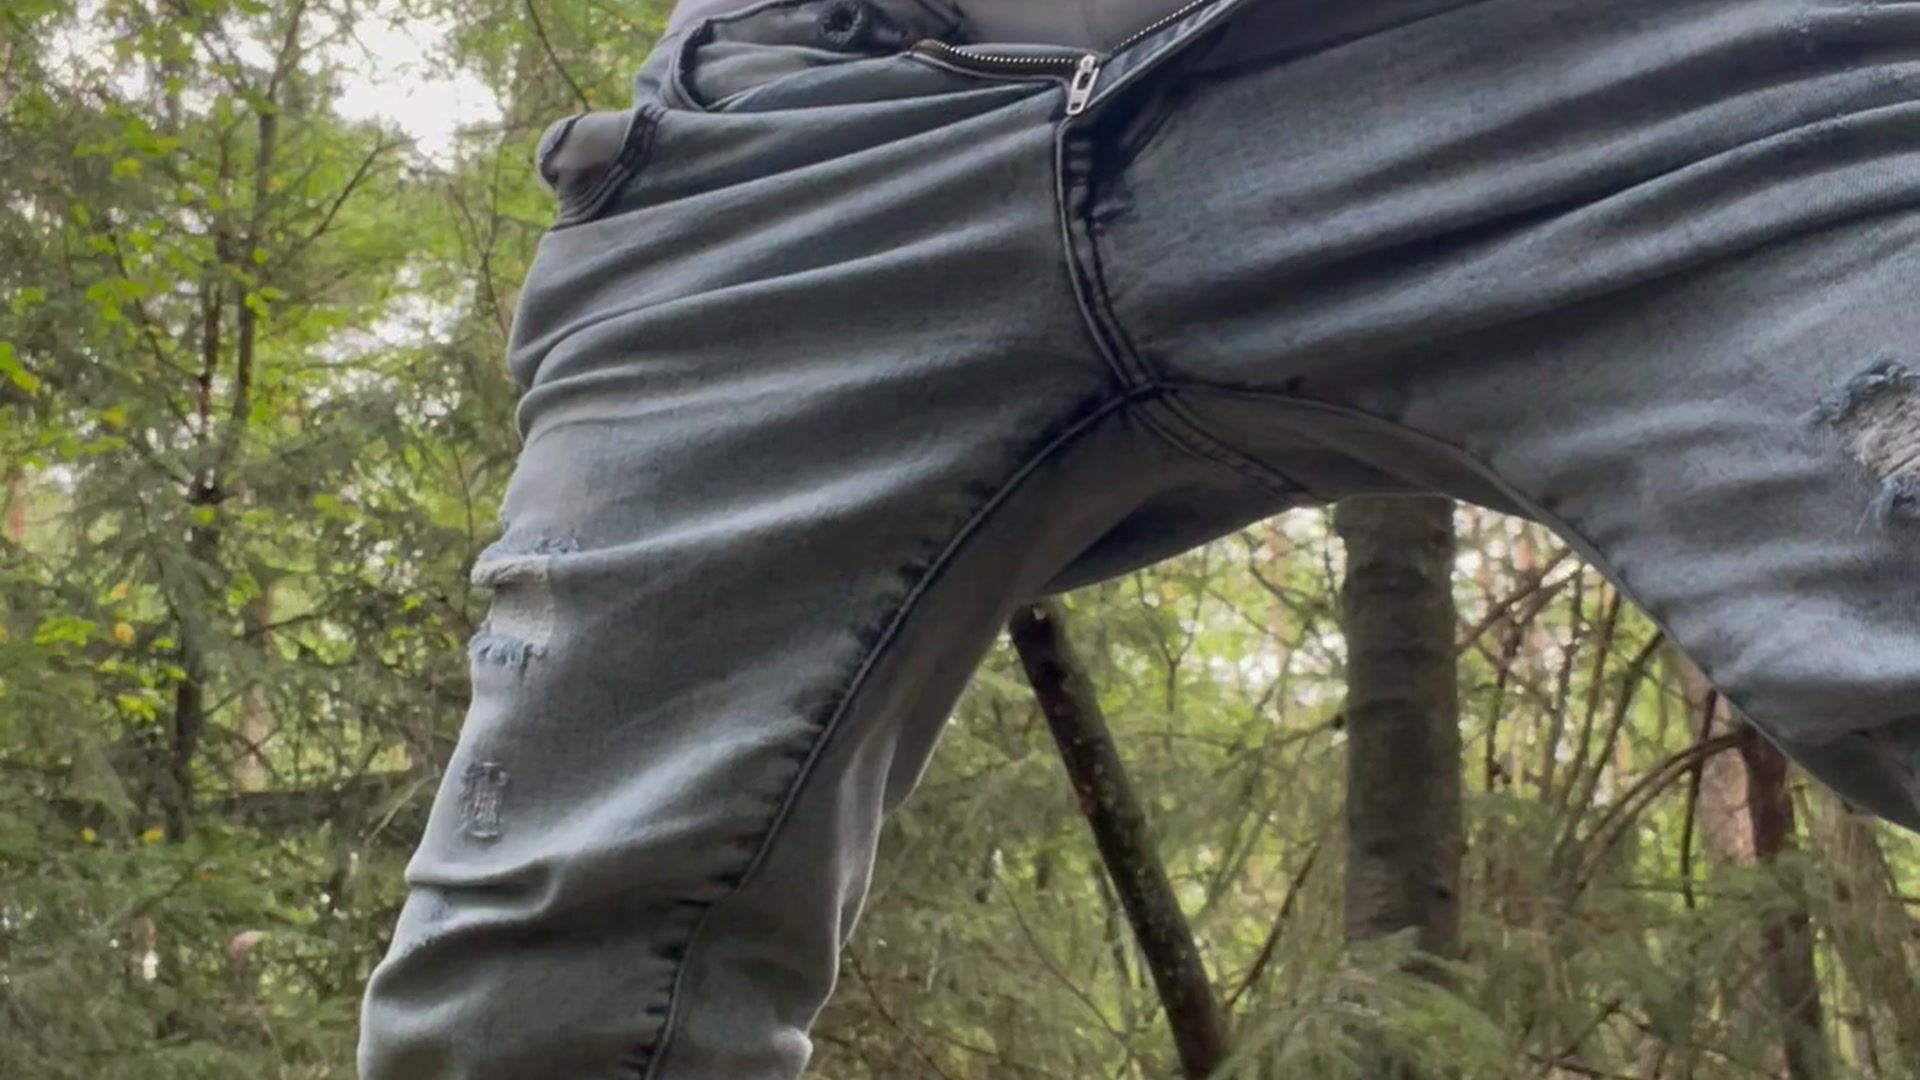 Big balls full of cum, jerking in forest with jeans and underwear